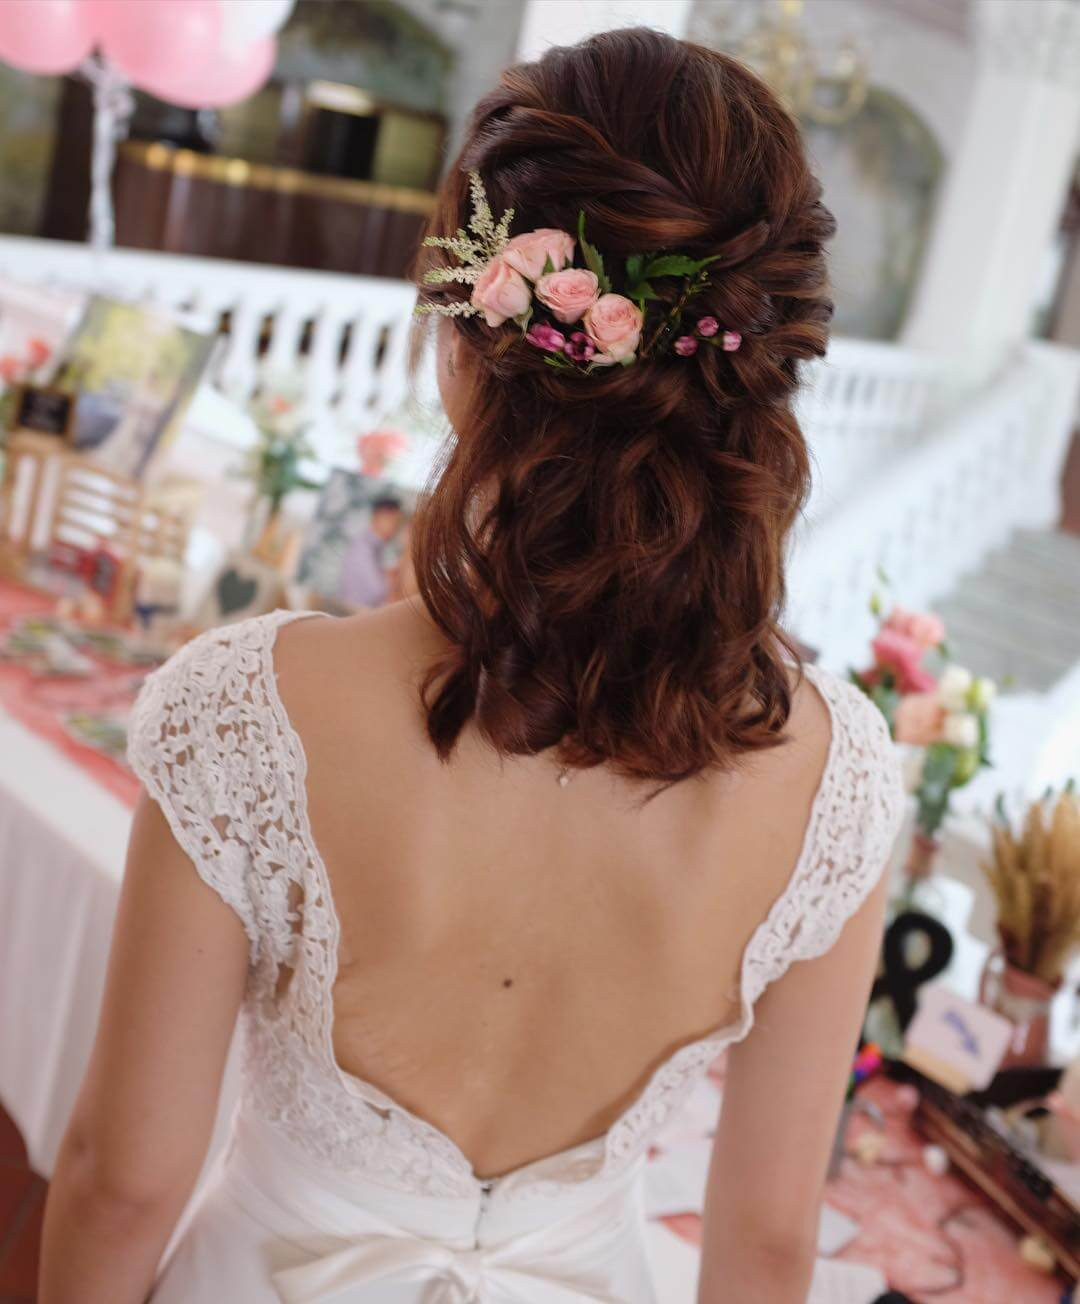 Curly Hairstyle For Wedding
 25 Curly Wedding Hairstyle Ideas Designs